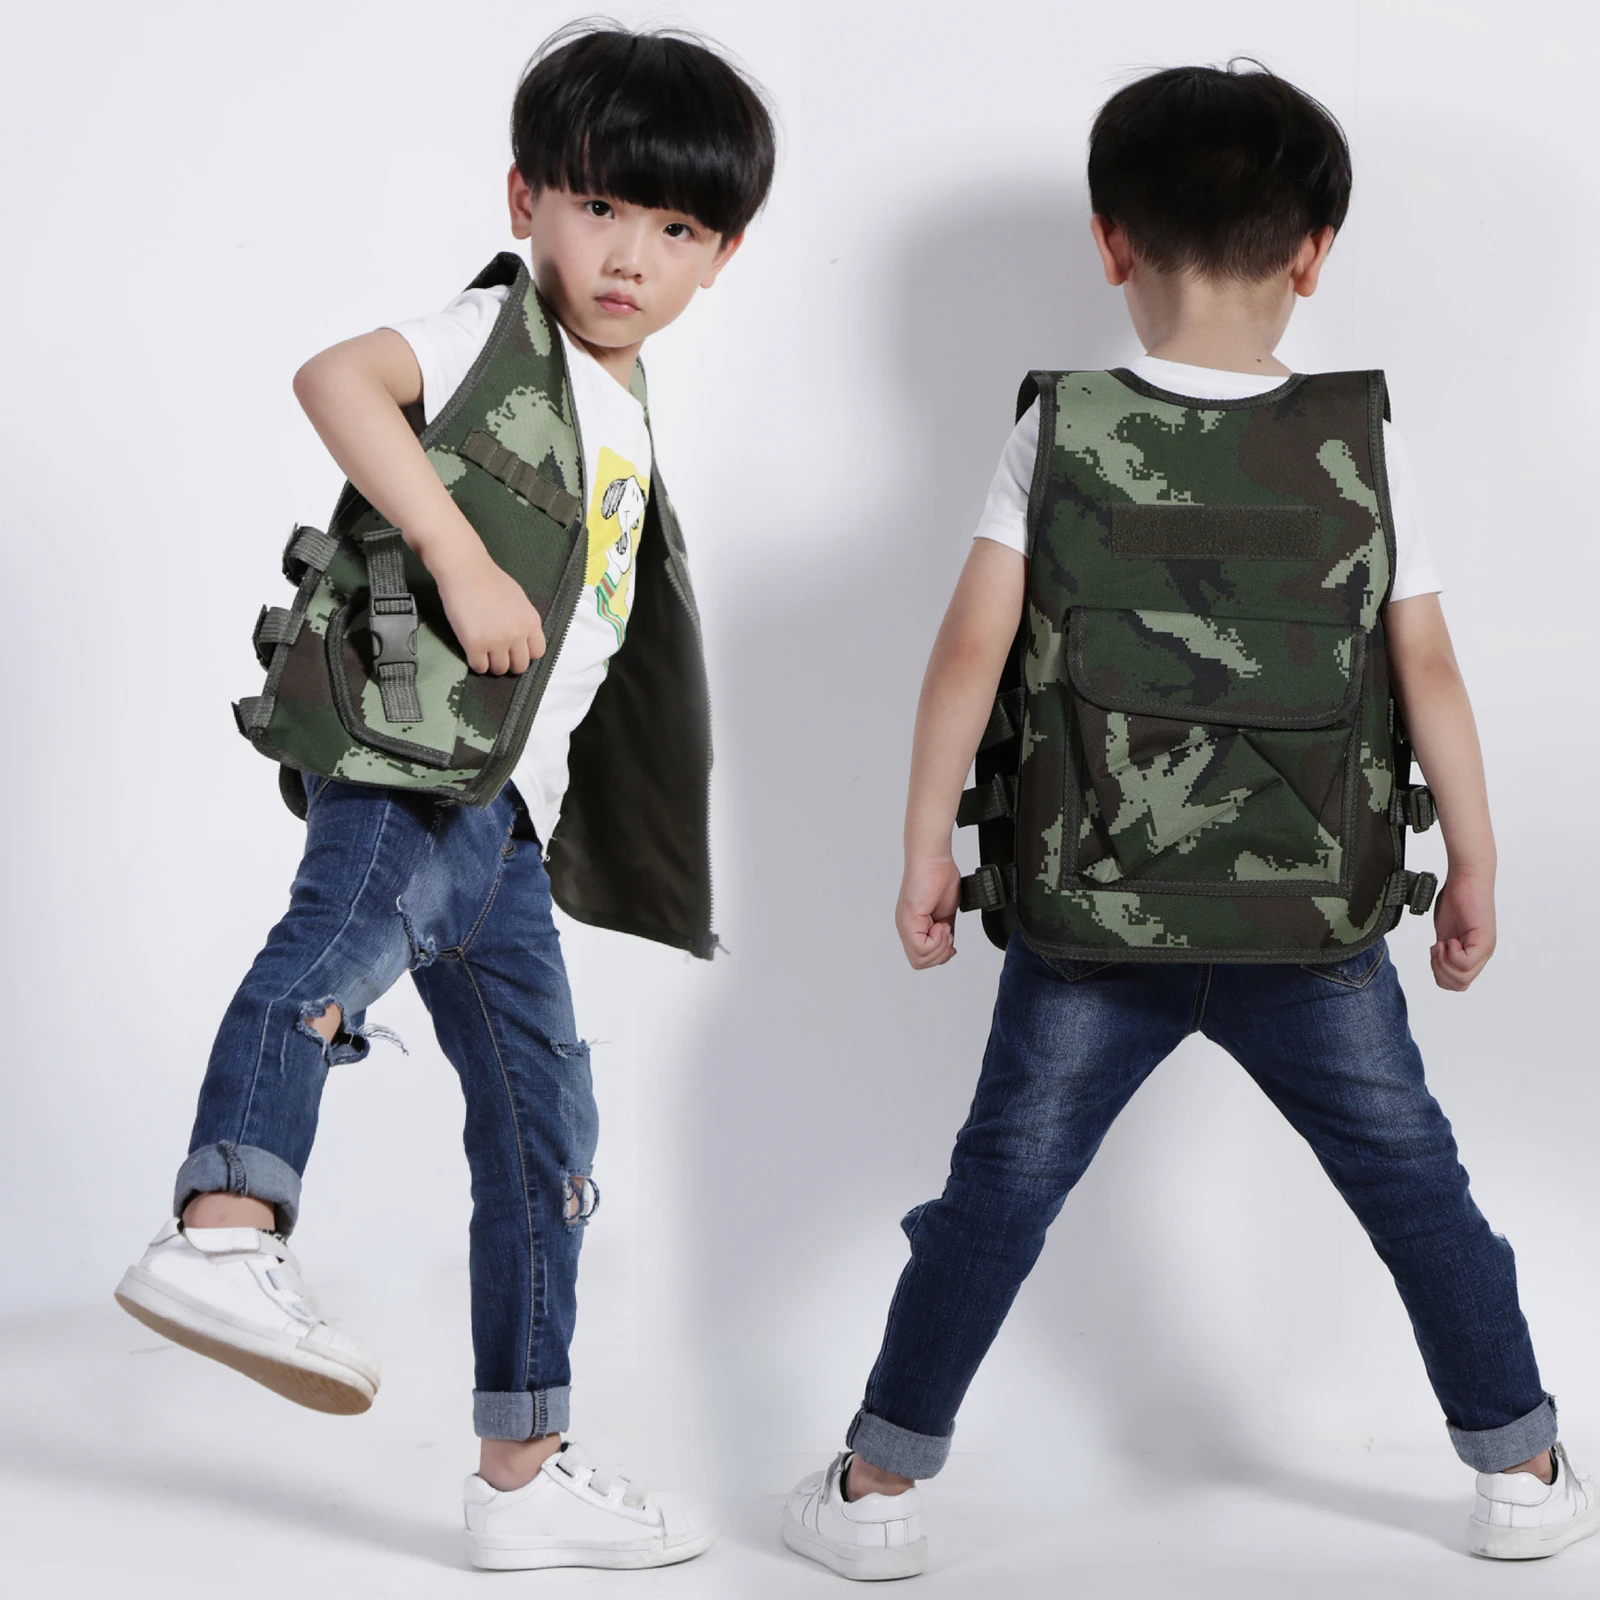 Kids Tactical Vest Holster Waistcoat Assault Gear Army Plate Carrier Outdoor Boys Camping Hunting Combat Games Training Vest